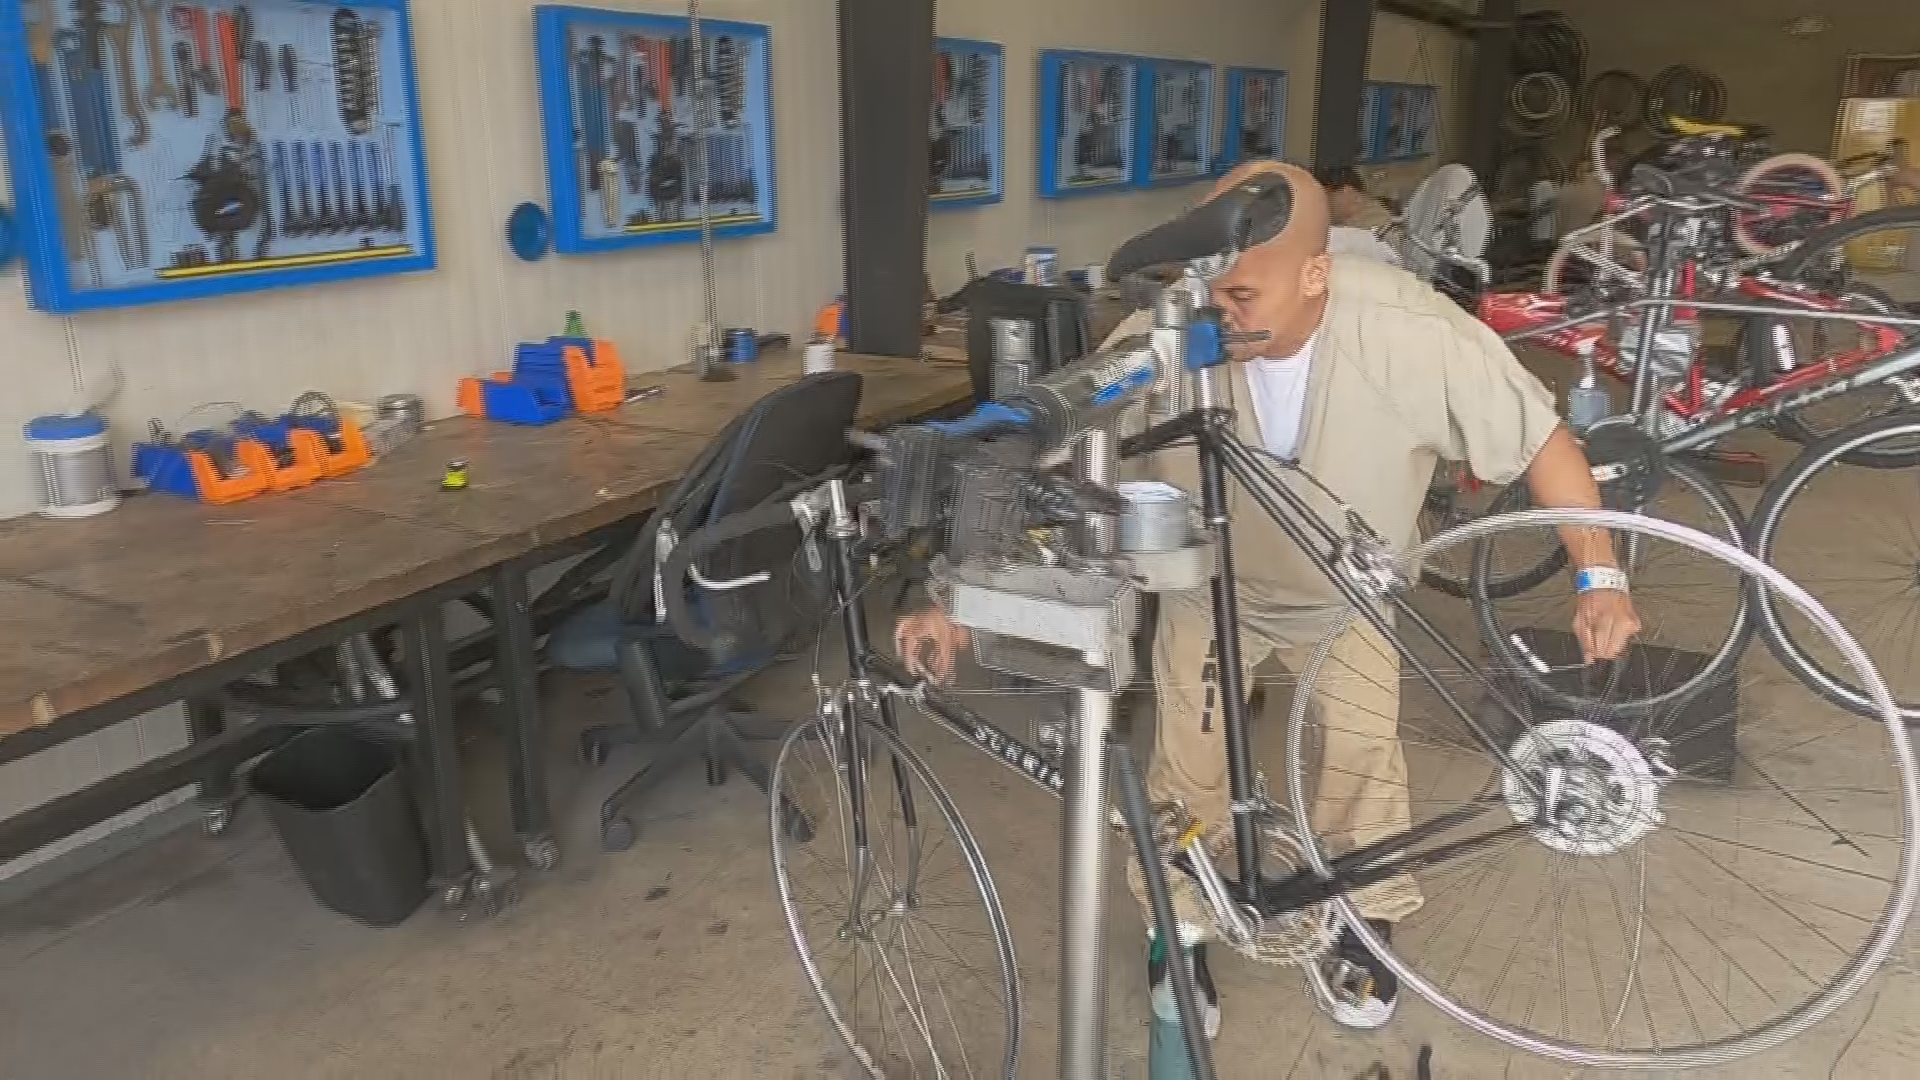 2,600 bicycles have been fixed up for children and charities.